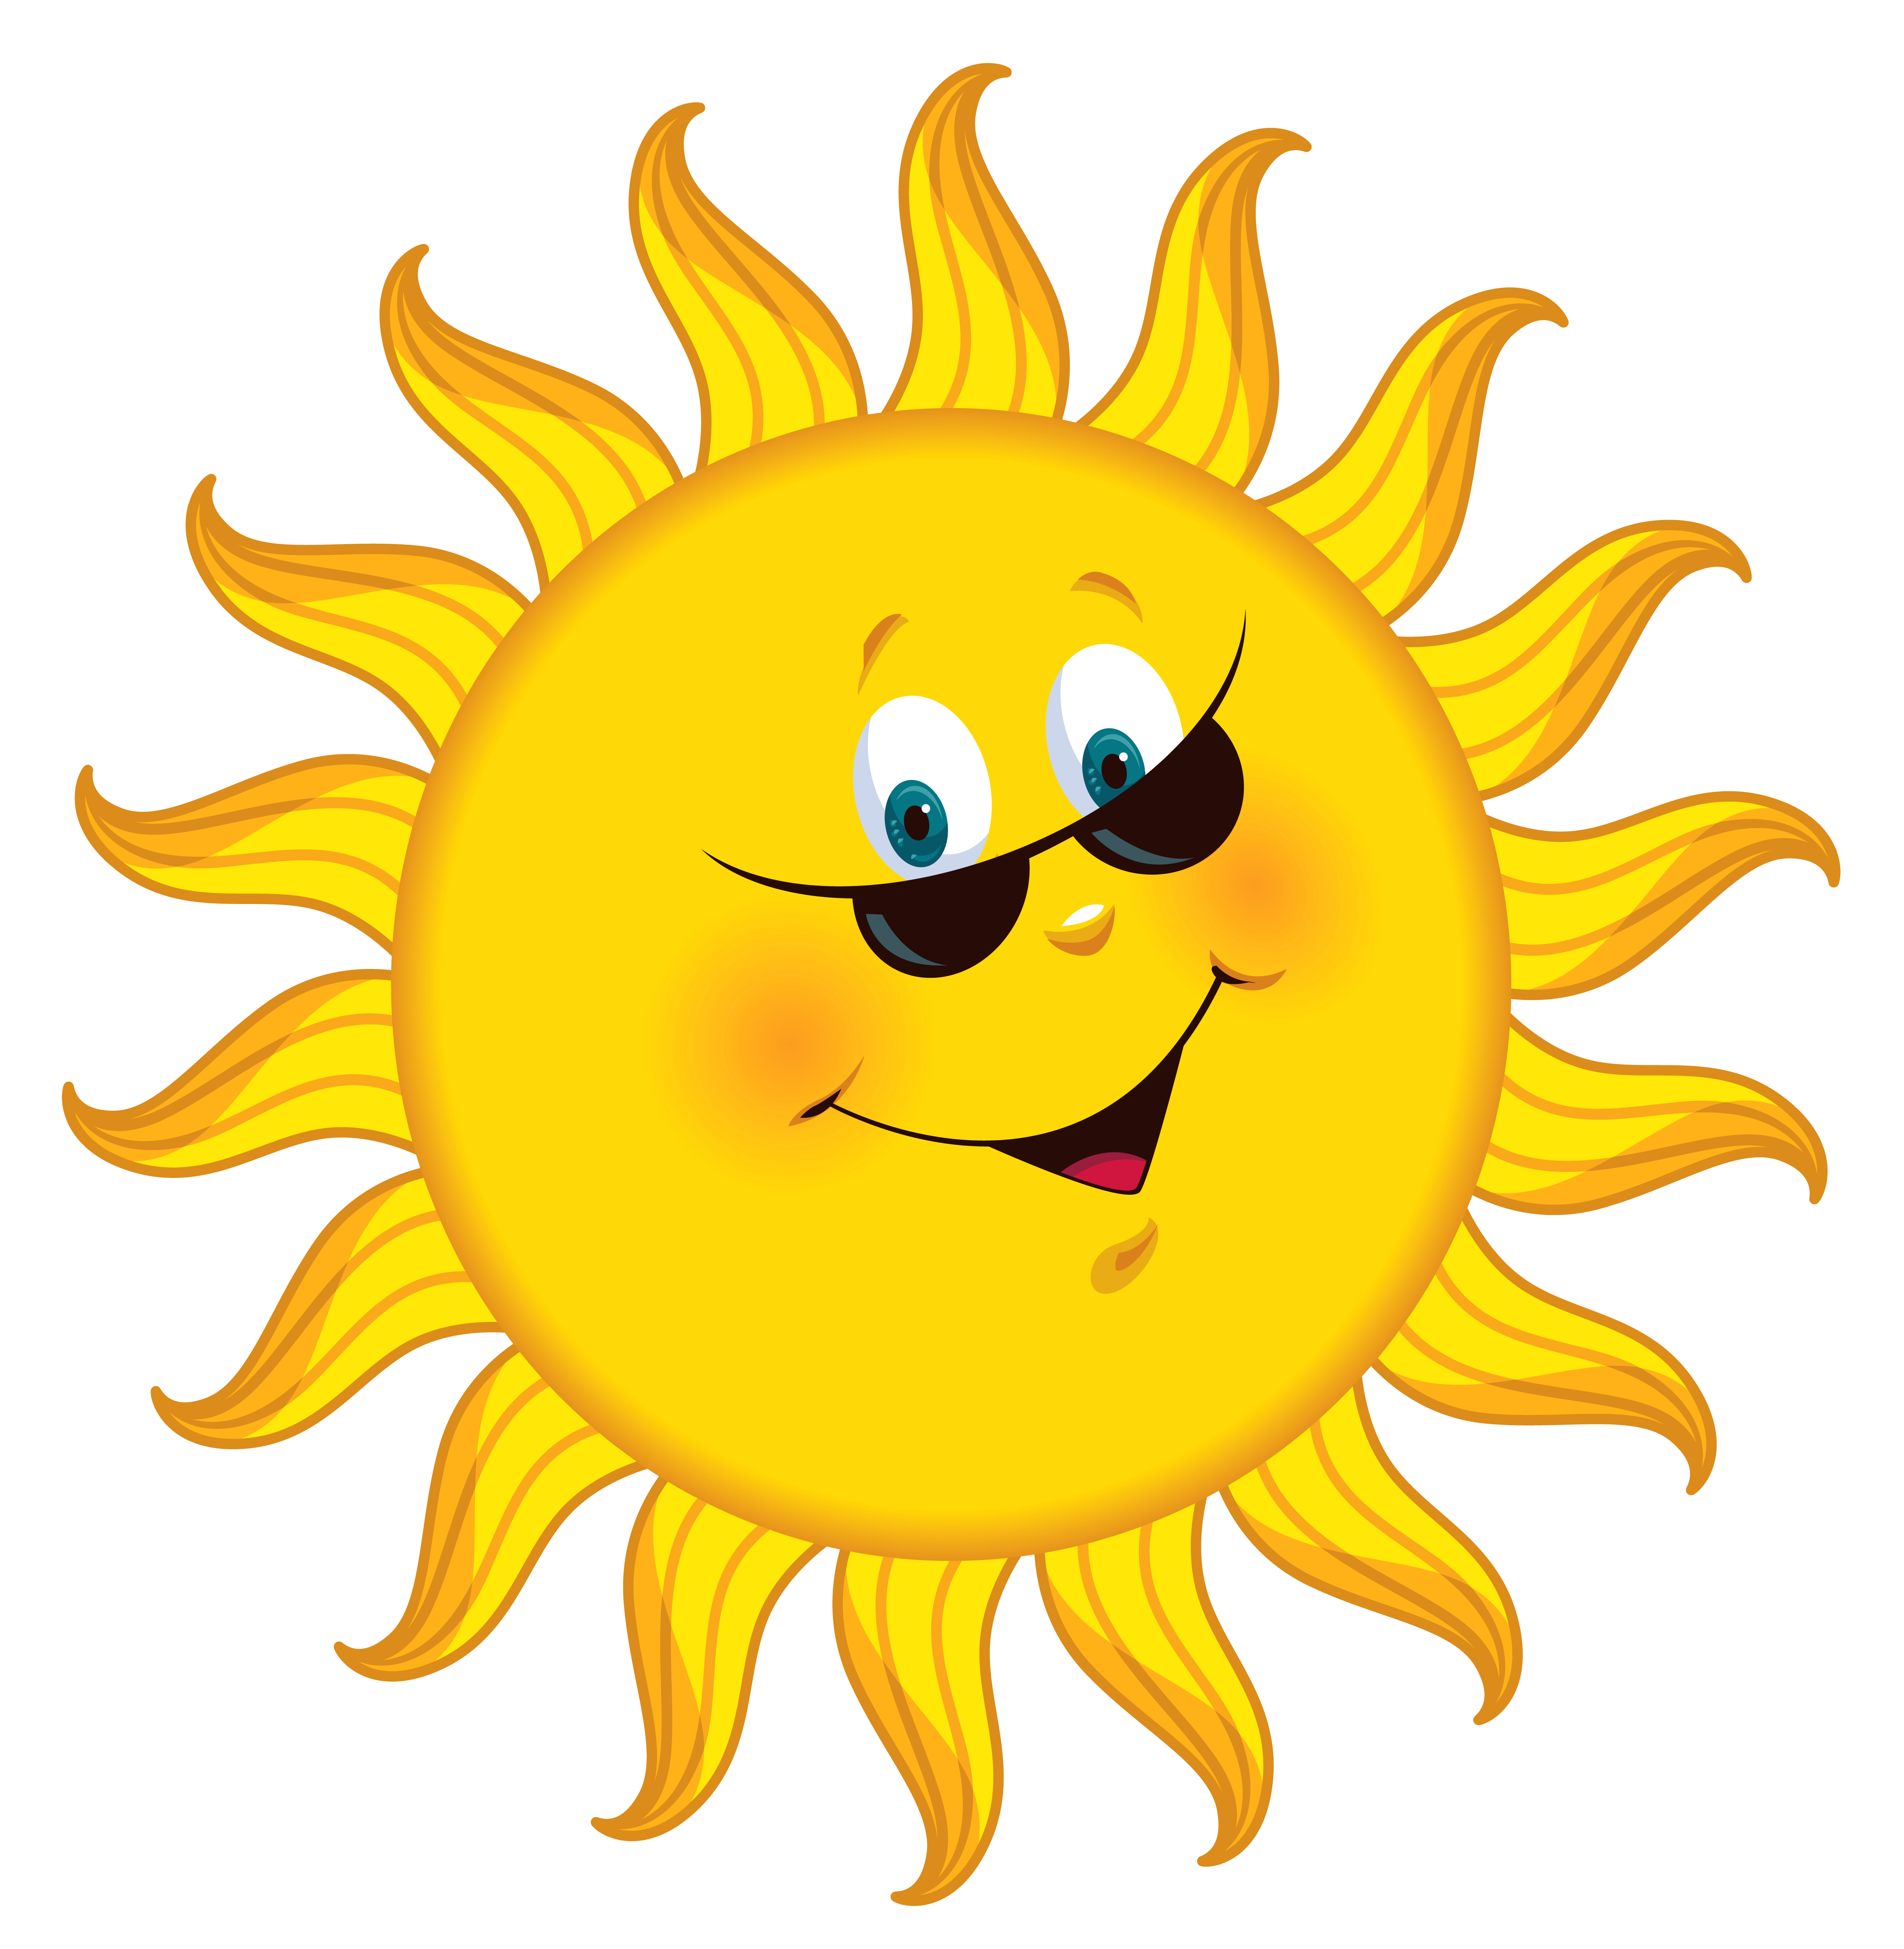 Aesthetic Sun PNG Images Transparent Background | PNG Play